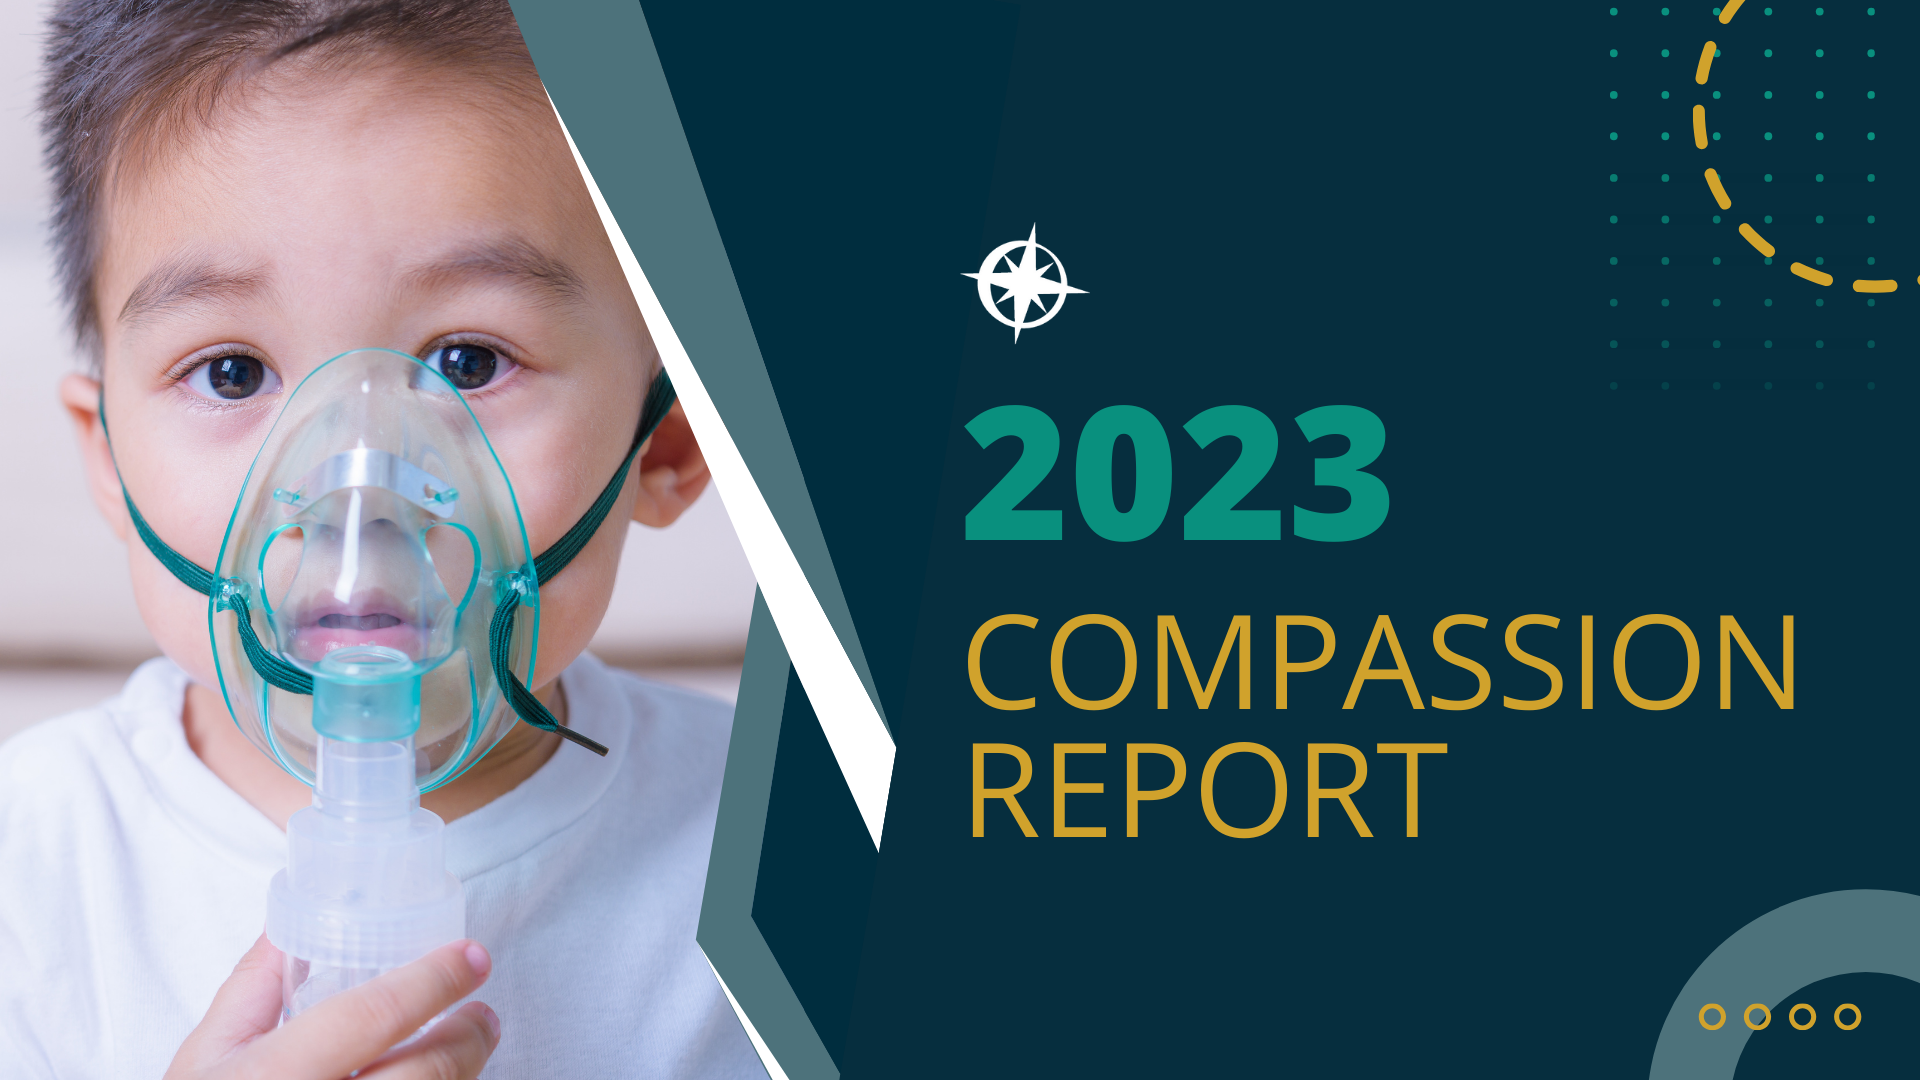 Our 2023 Compassion Report: Making a Difference Through Compass Cares